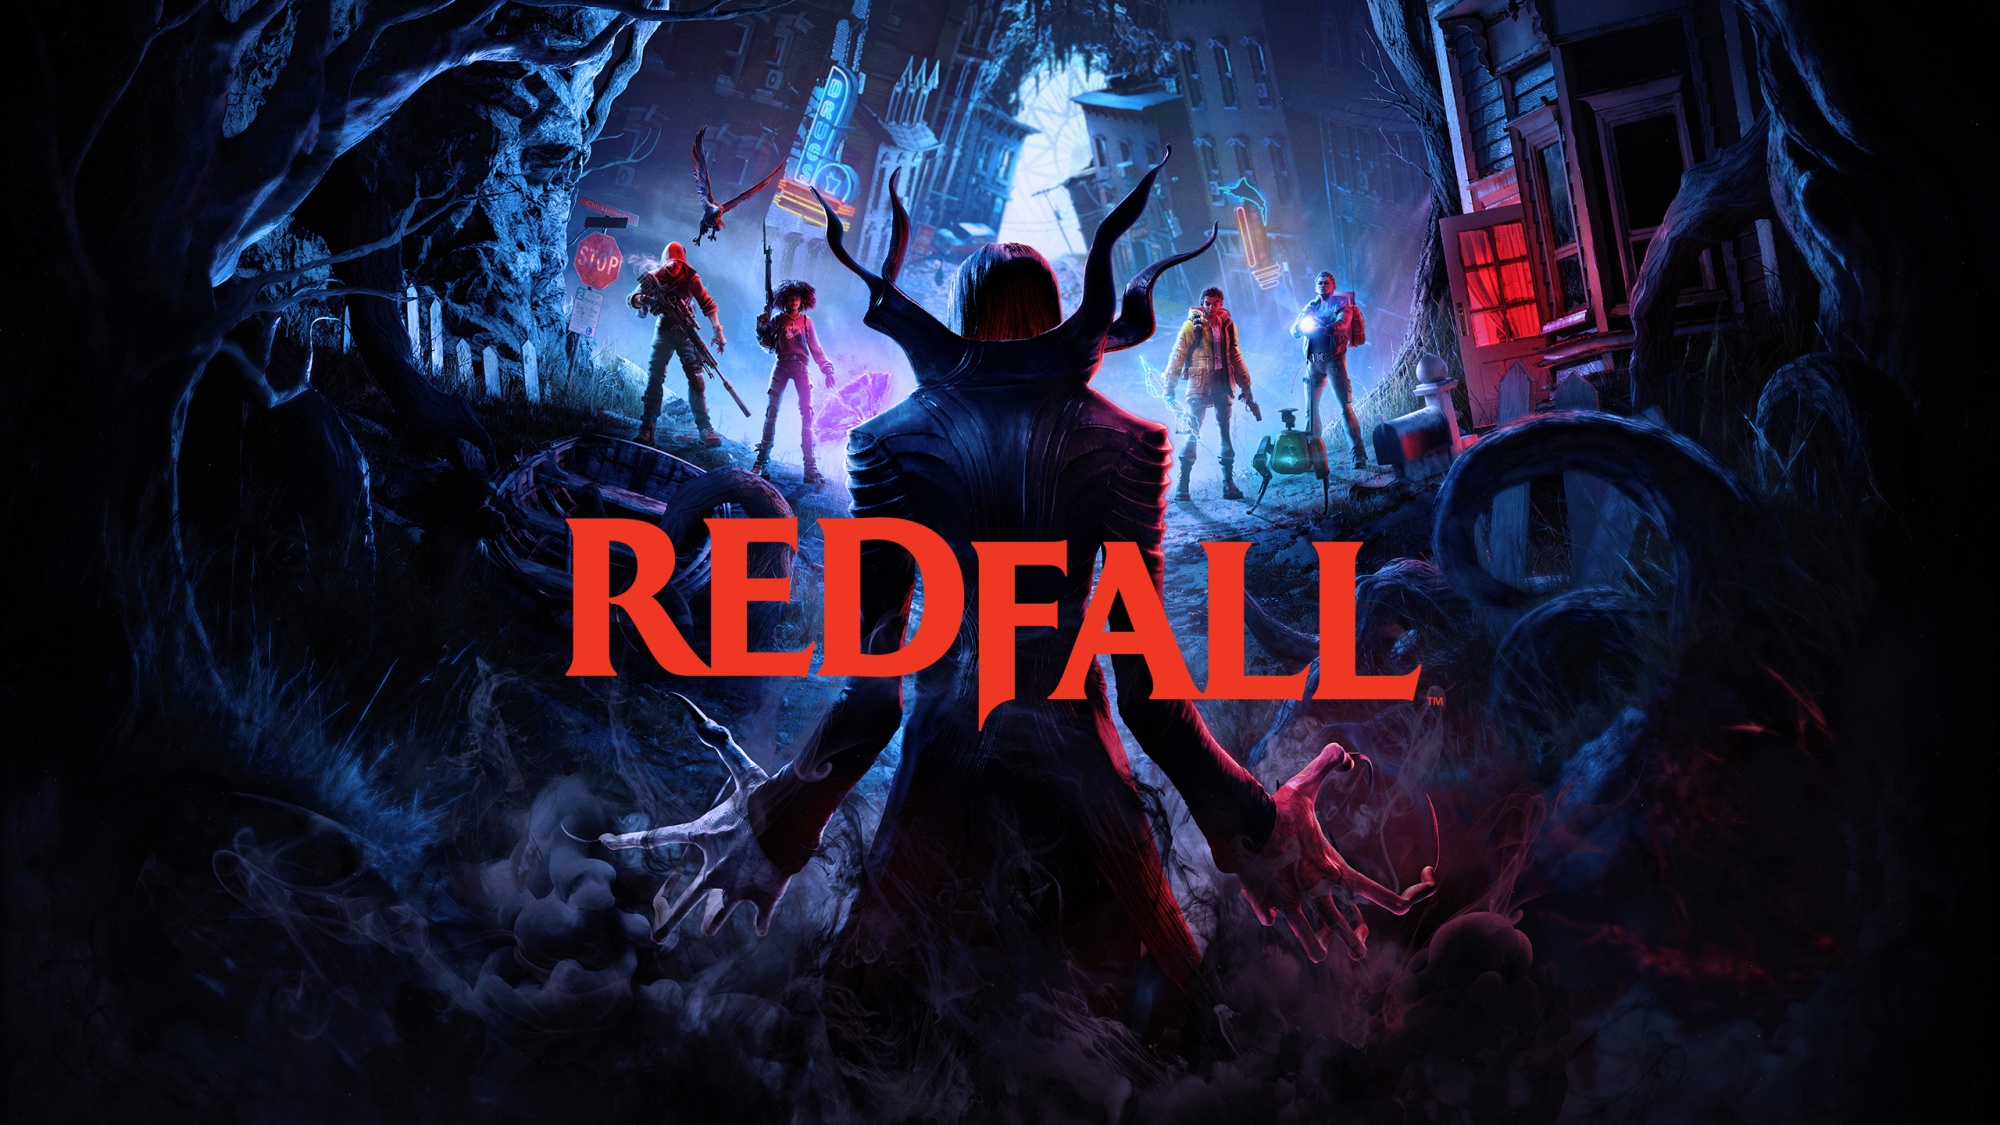 Redfall Receives Negative Reviews, Raising Concerns for Starfield